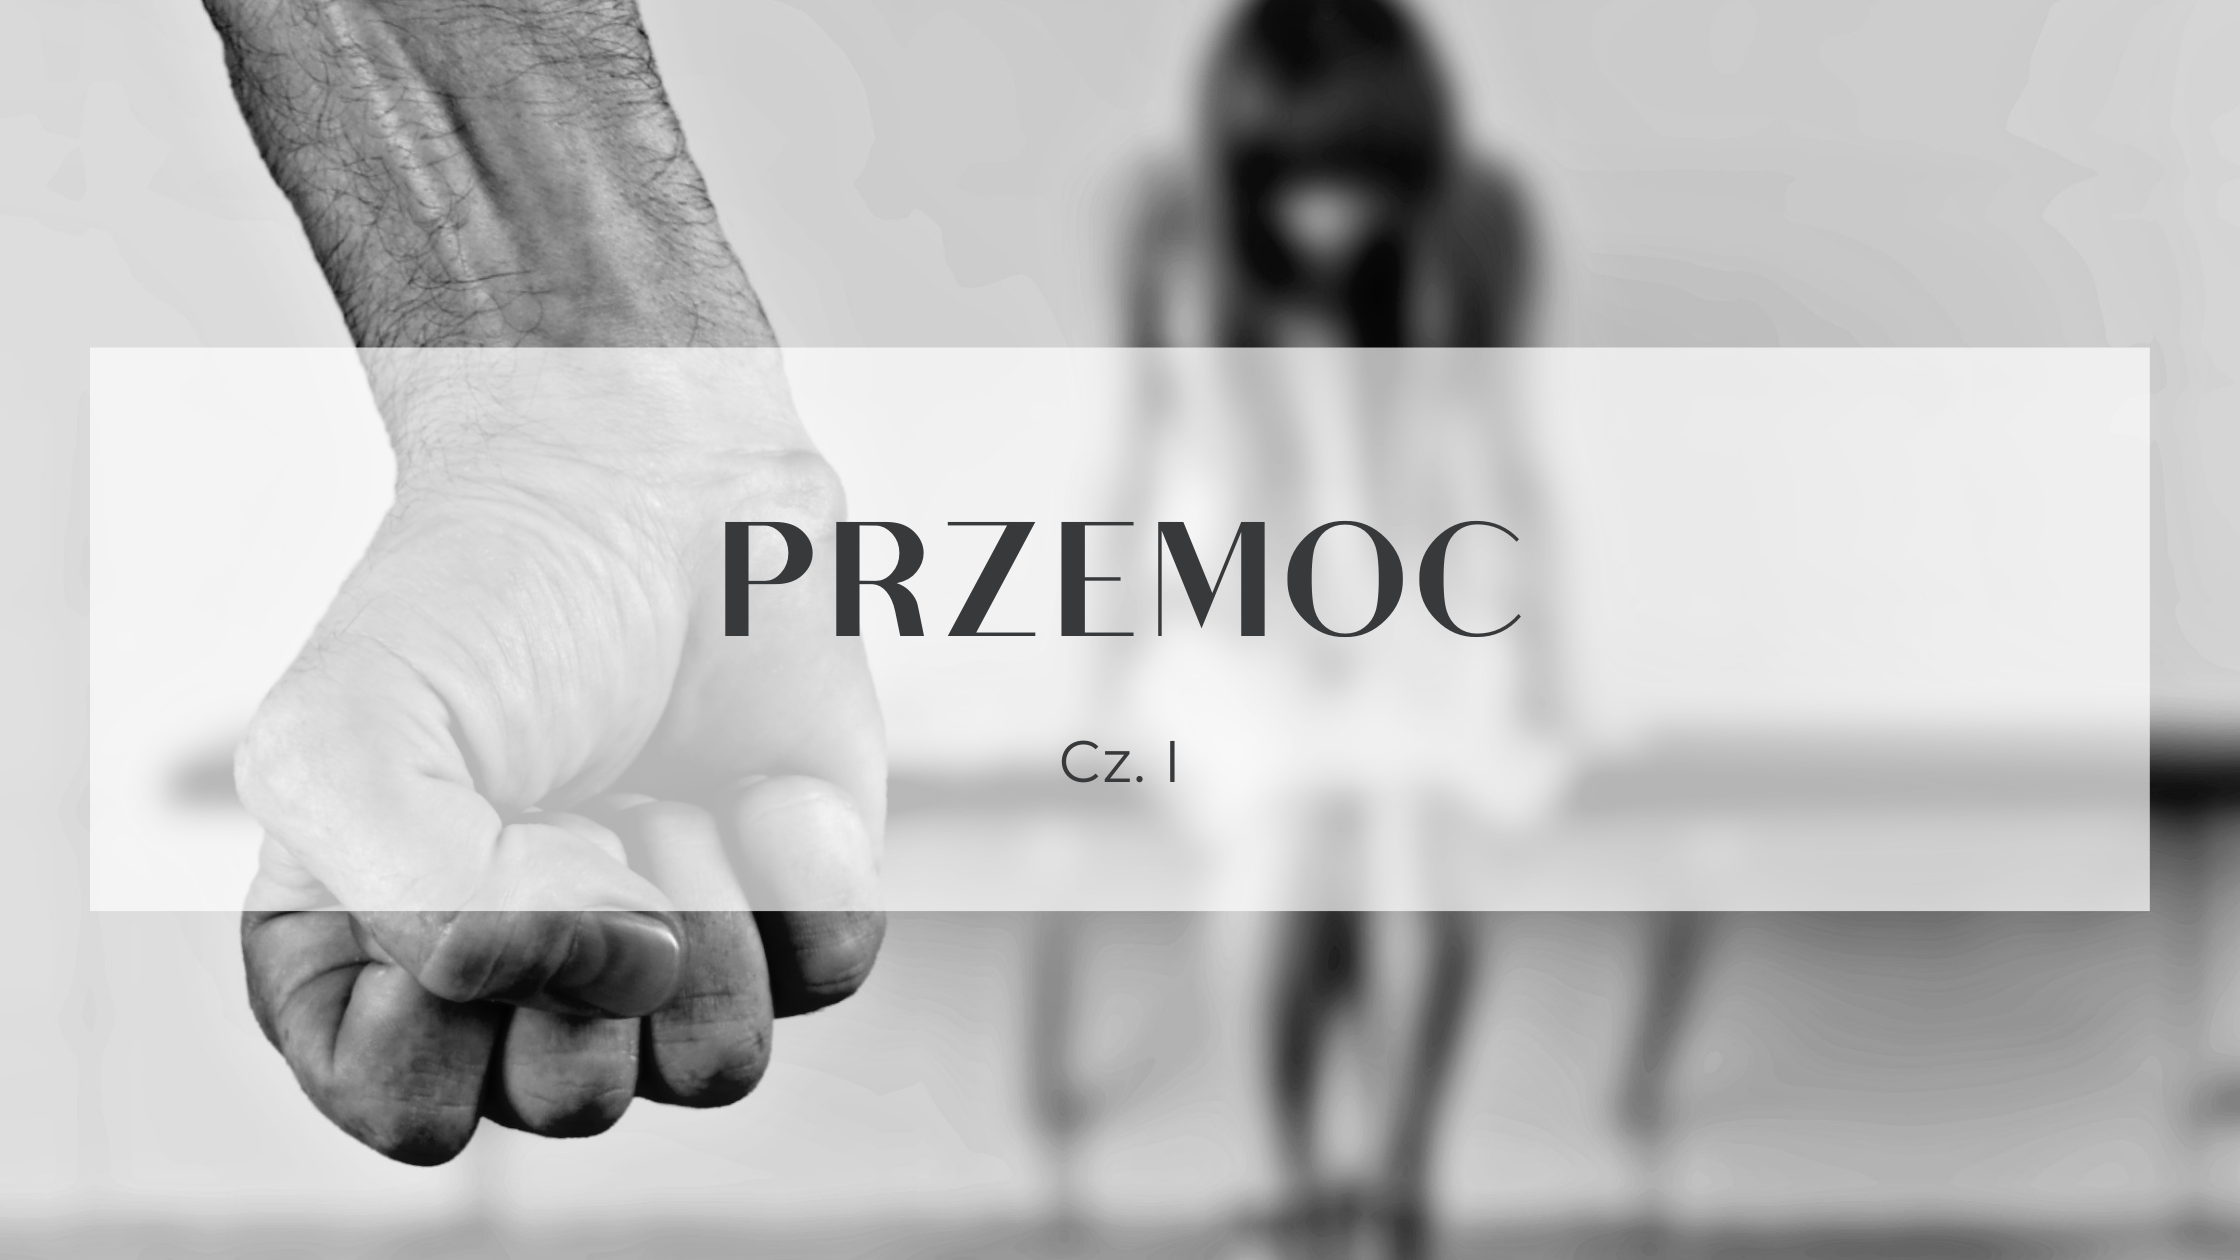 You are currently viewing Przemoc cz. I